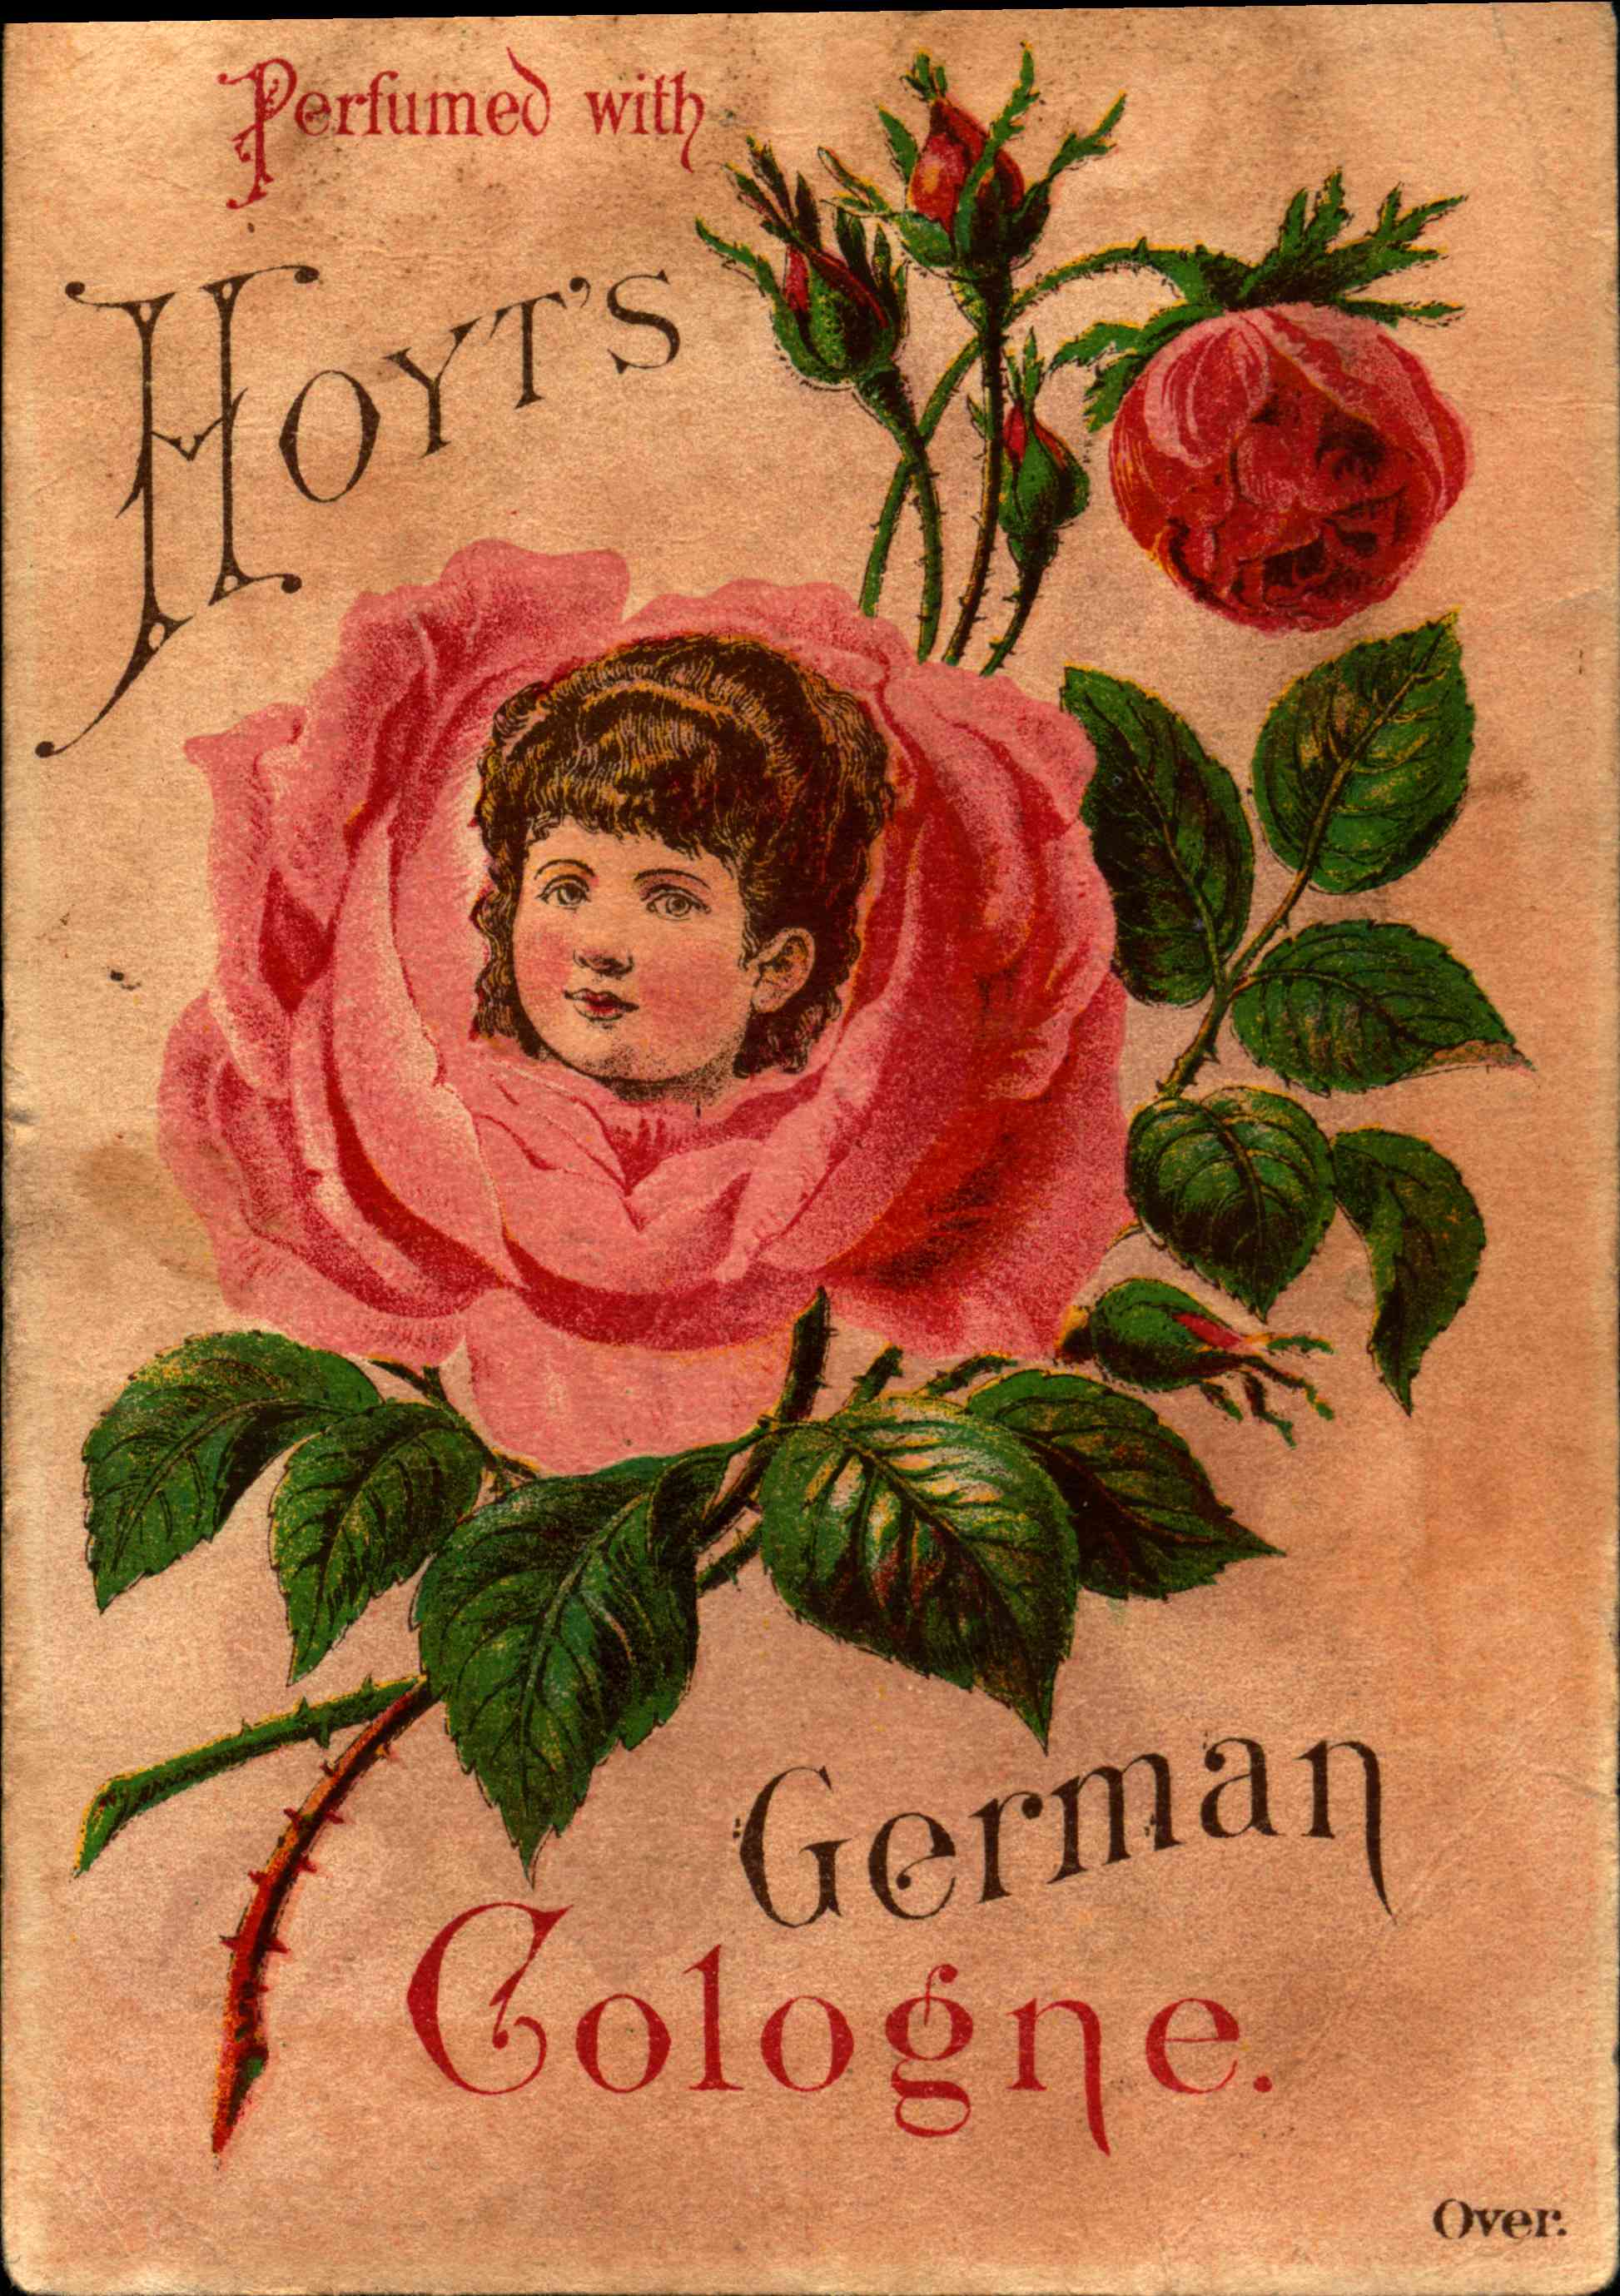 Front shows a spray of roses and a child's face